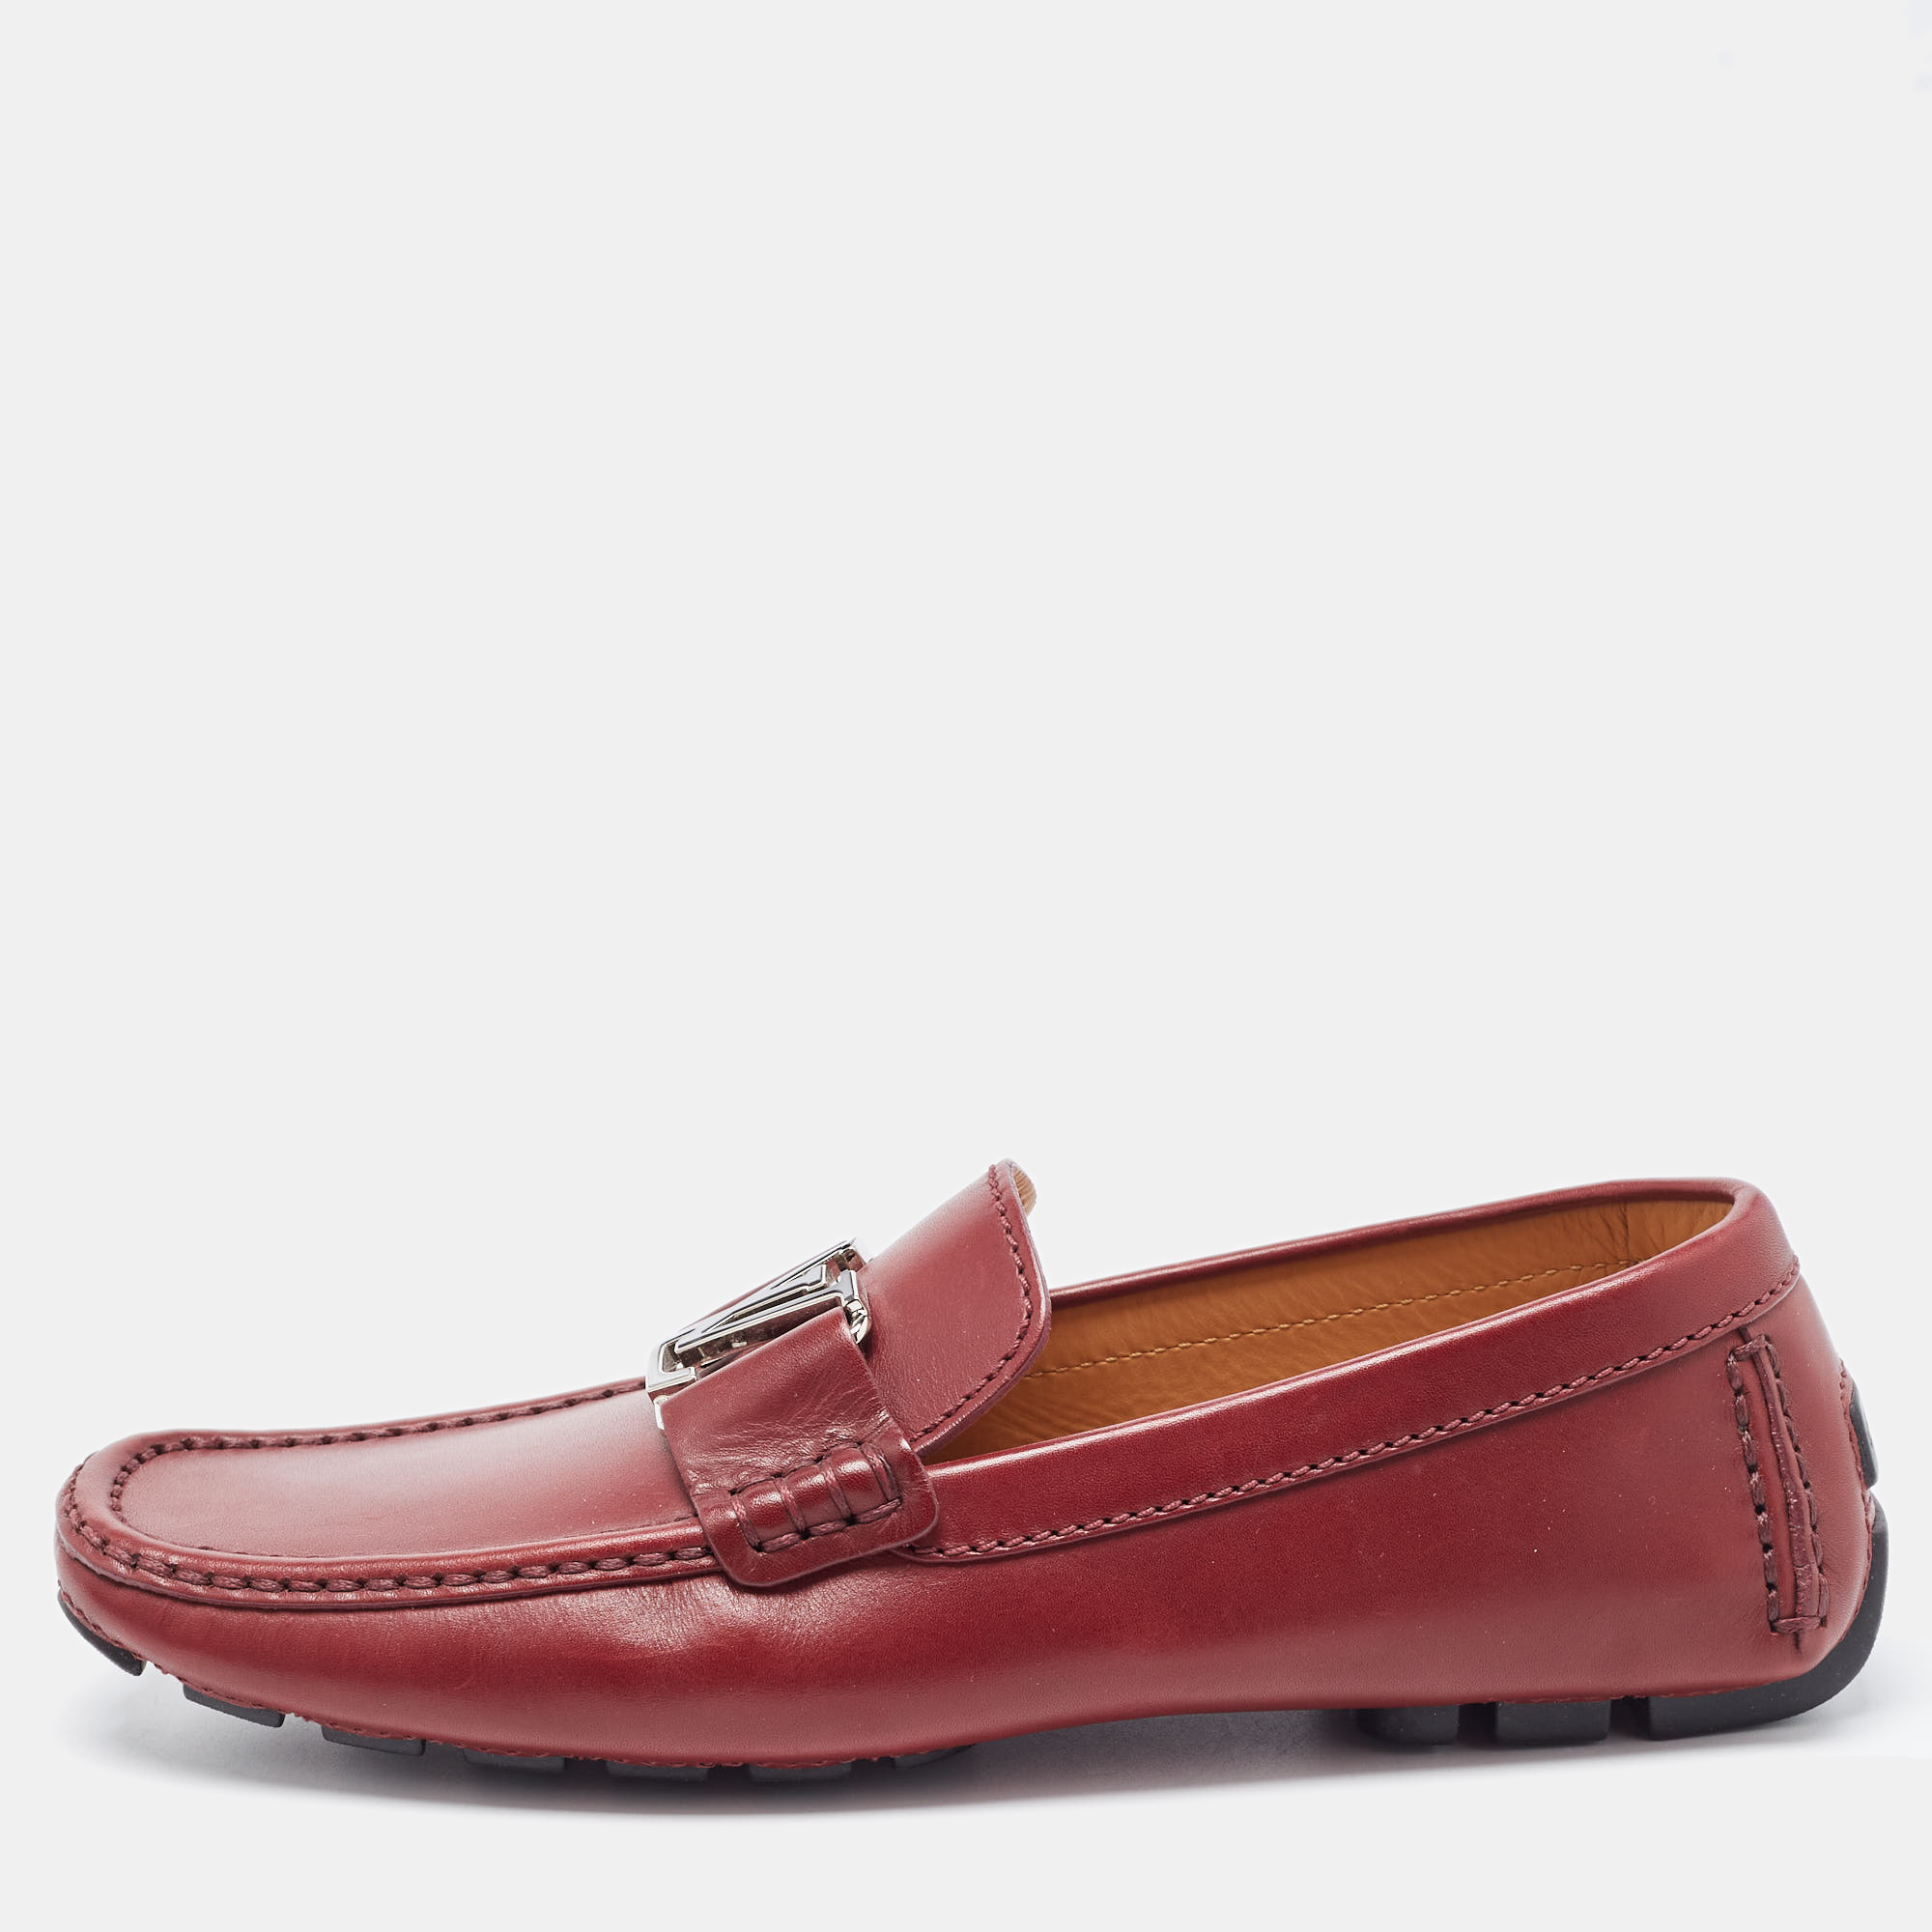 Pre-owned Louis Vuitton Burgundy Leather Monte Carlo Loafers Size 41